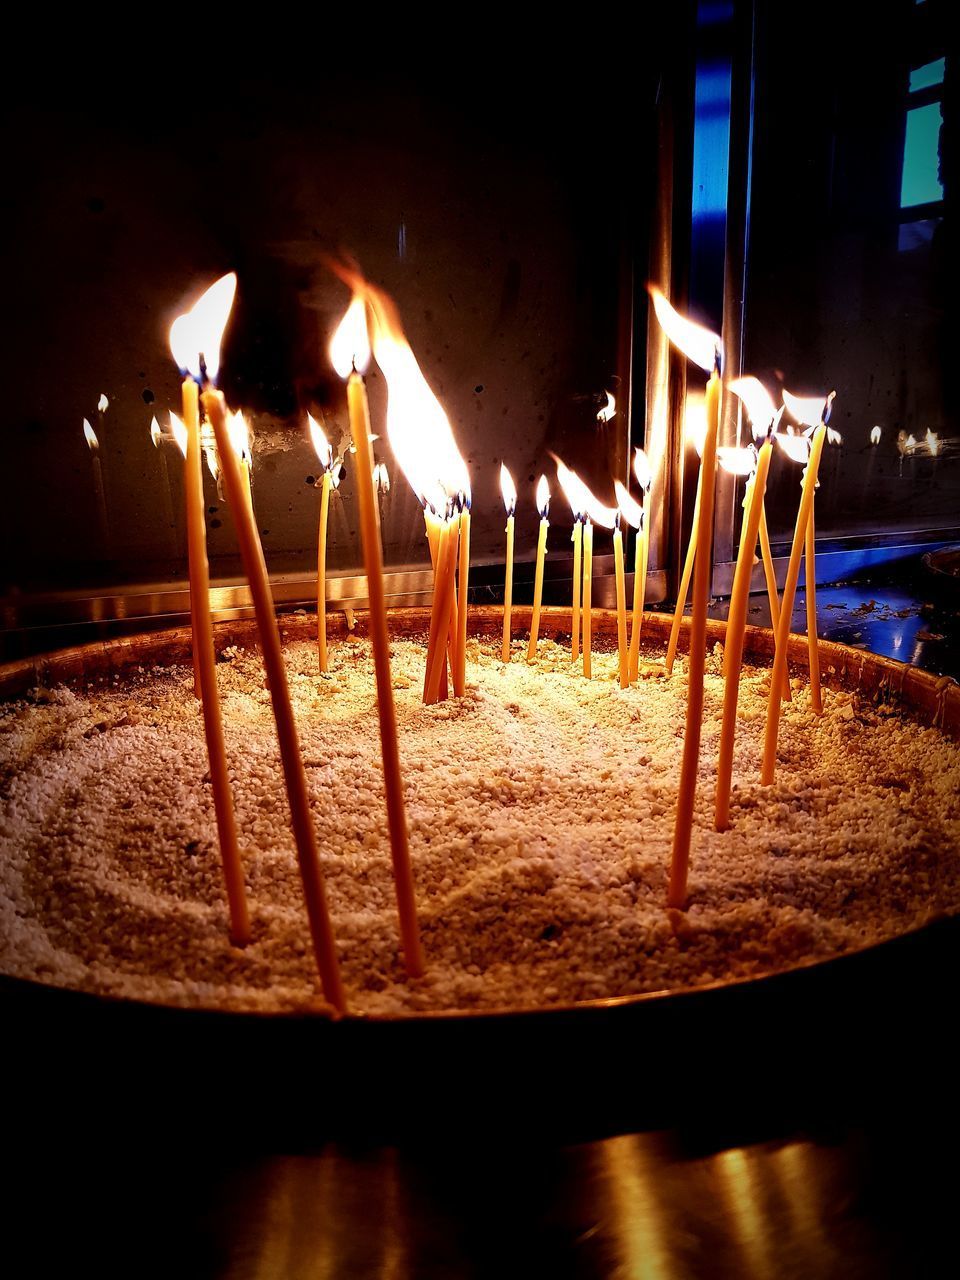 CLOSE-UP OF CANDLES ON WOODEN STRUCTURE